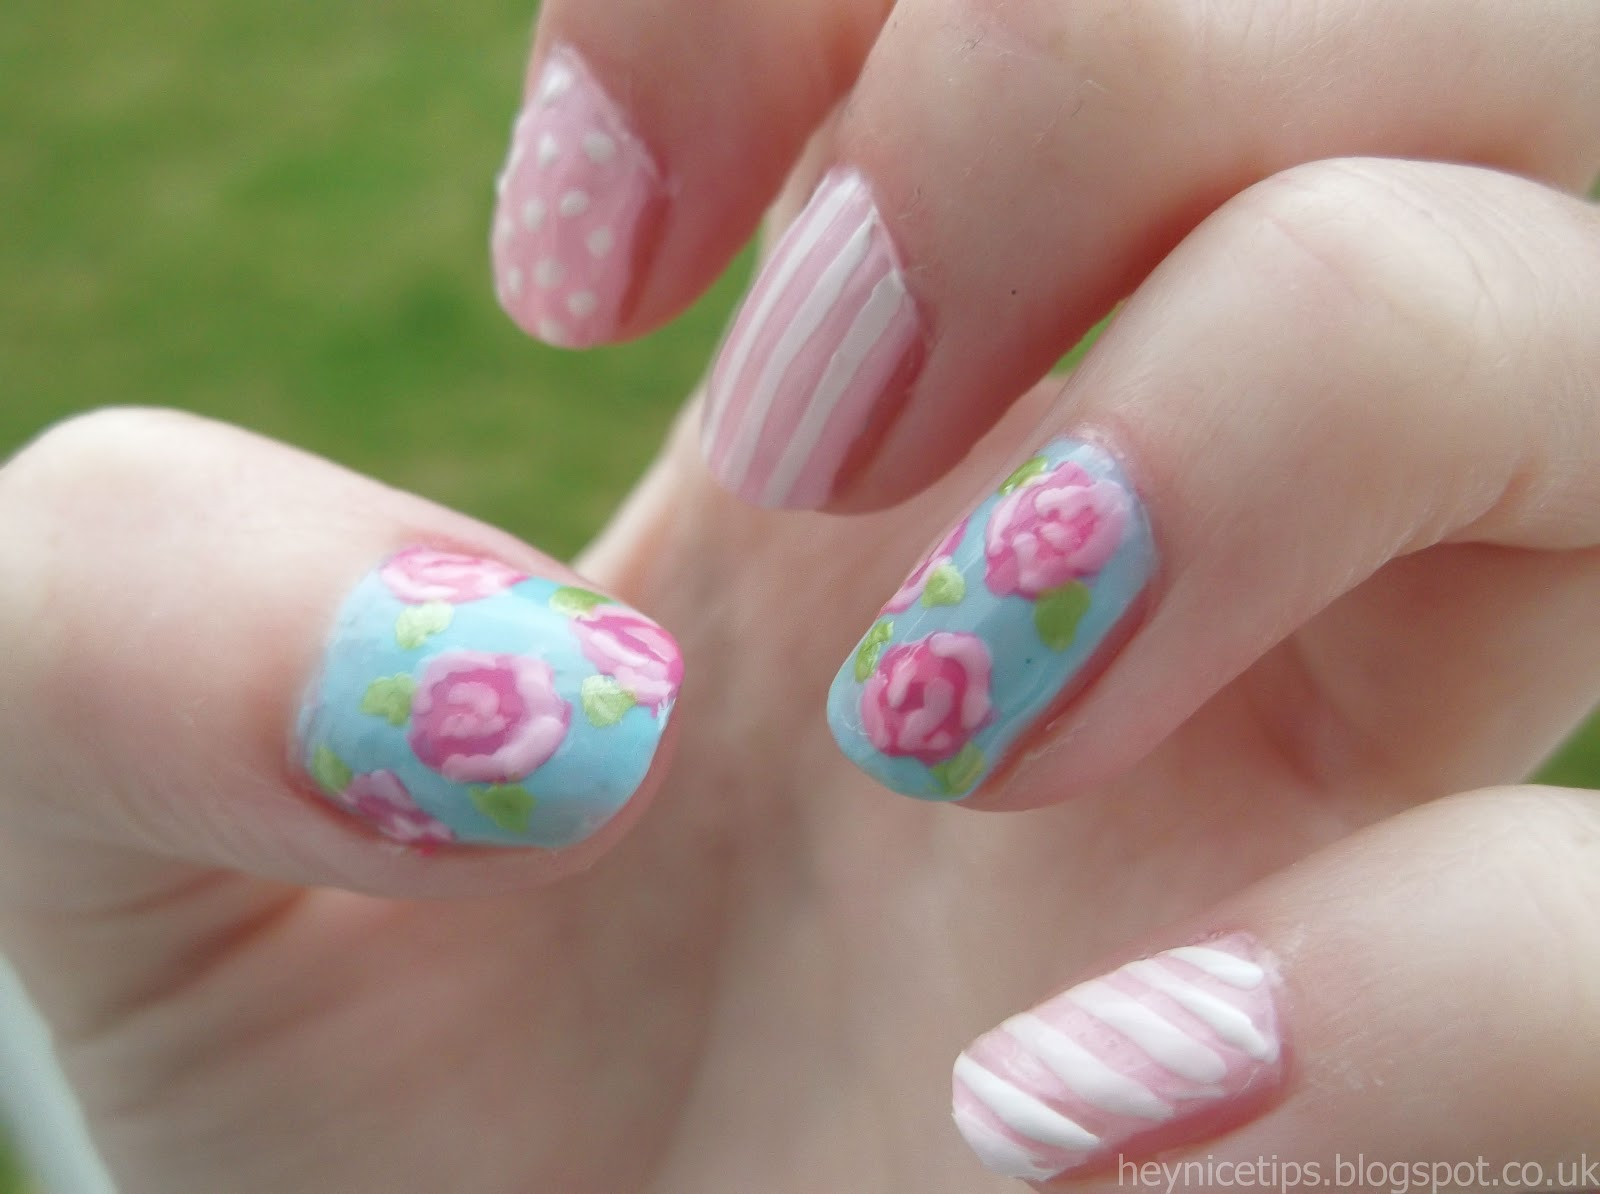 9. Girly and Chic Nail Designs on Tumblr - wide 5